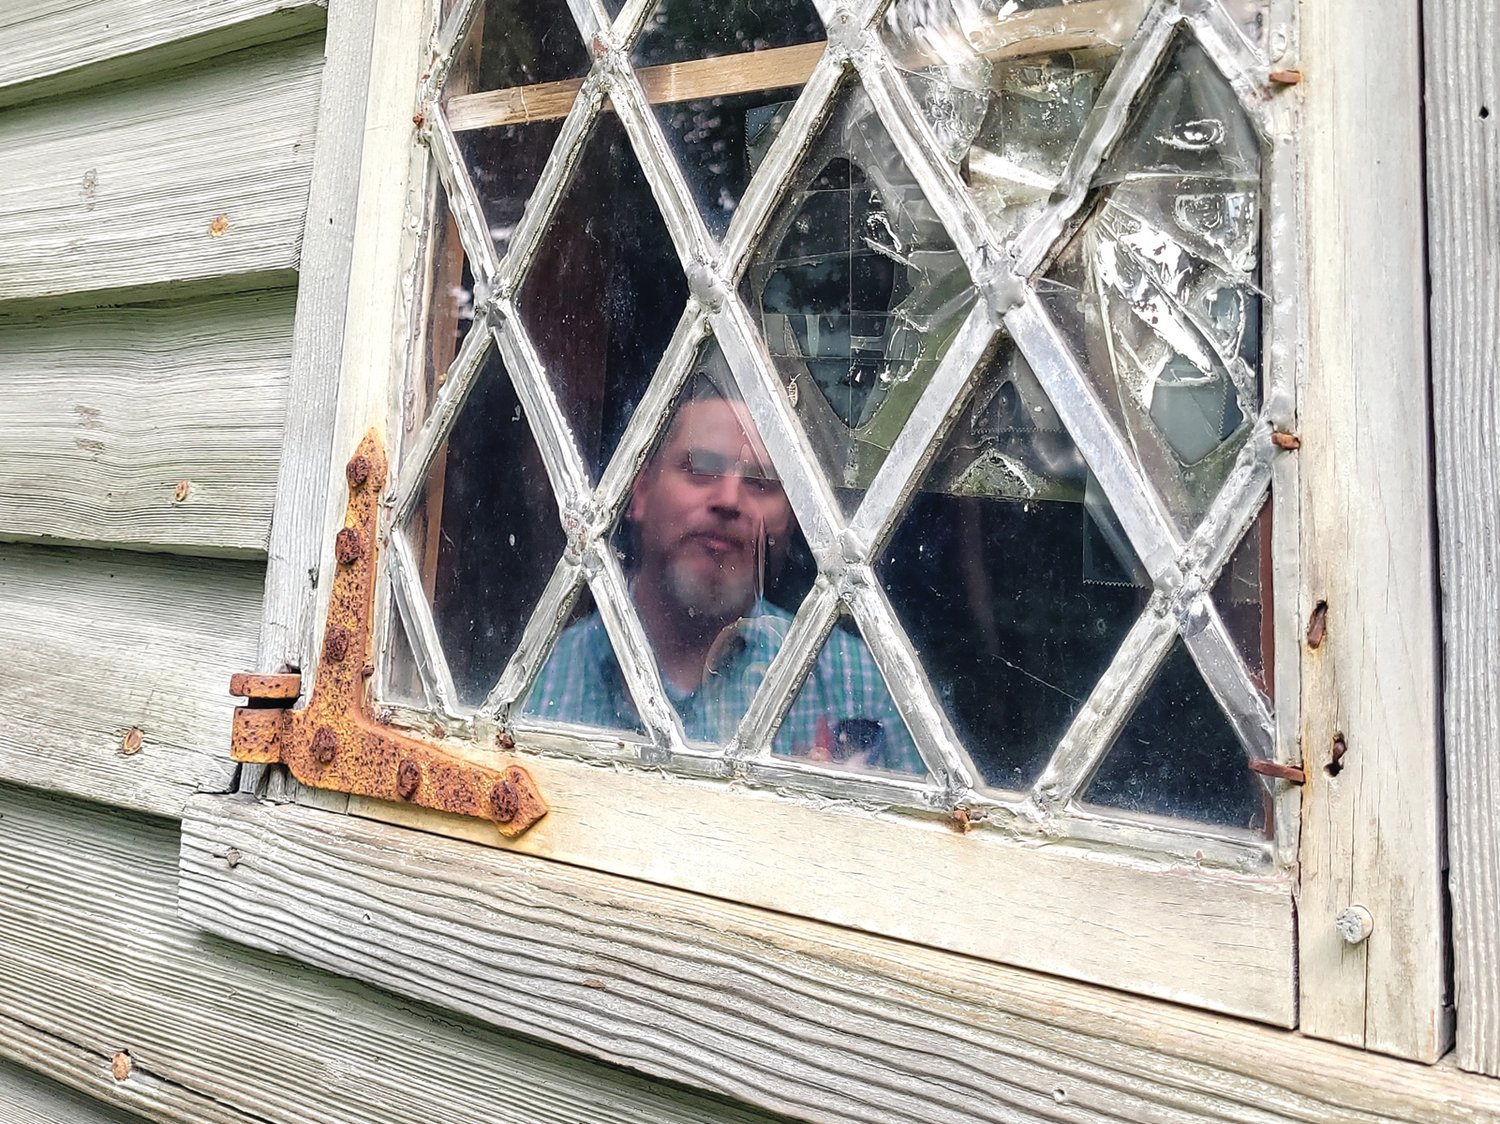 BROKEN GLASS: Historic New England representative Dan Santos, regional site administrator for Southern New England inspects a broken window at the Clemence-Irons House in Johnston.